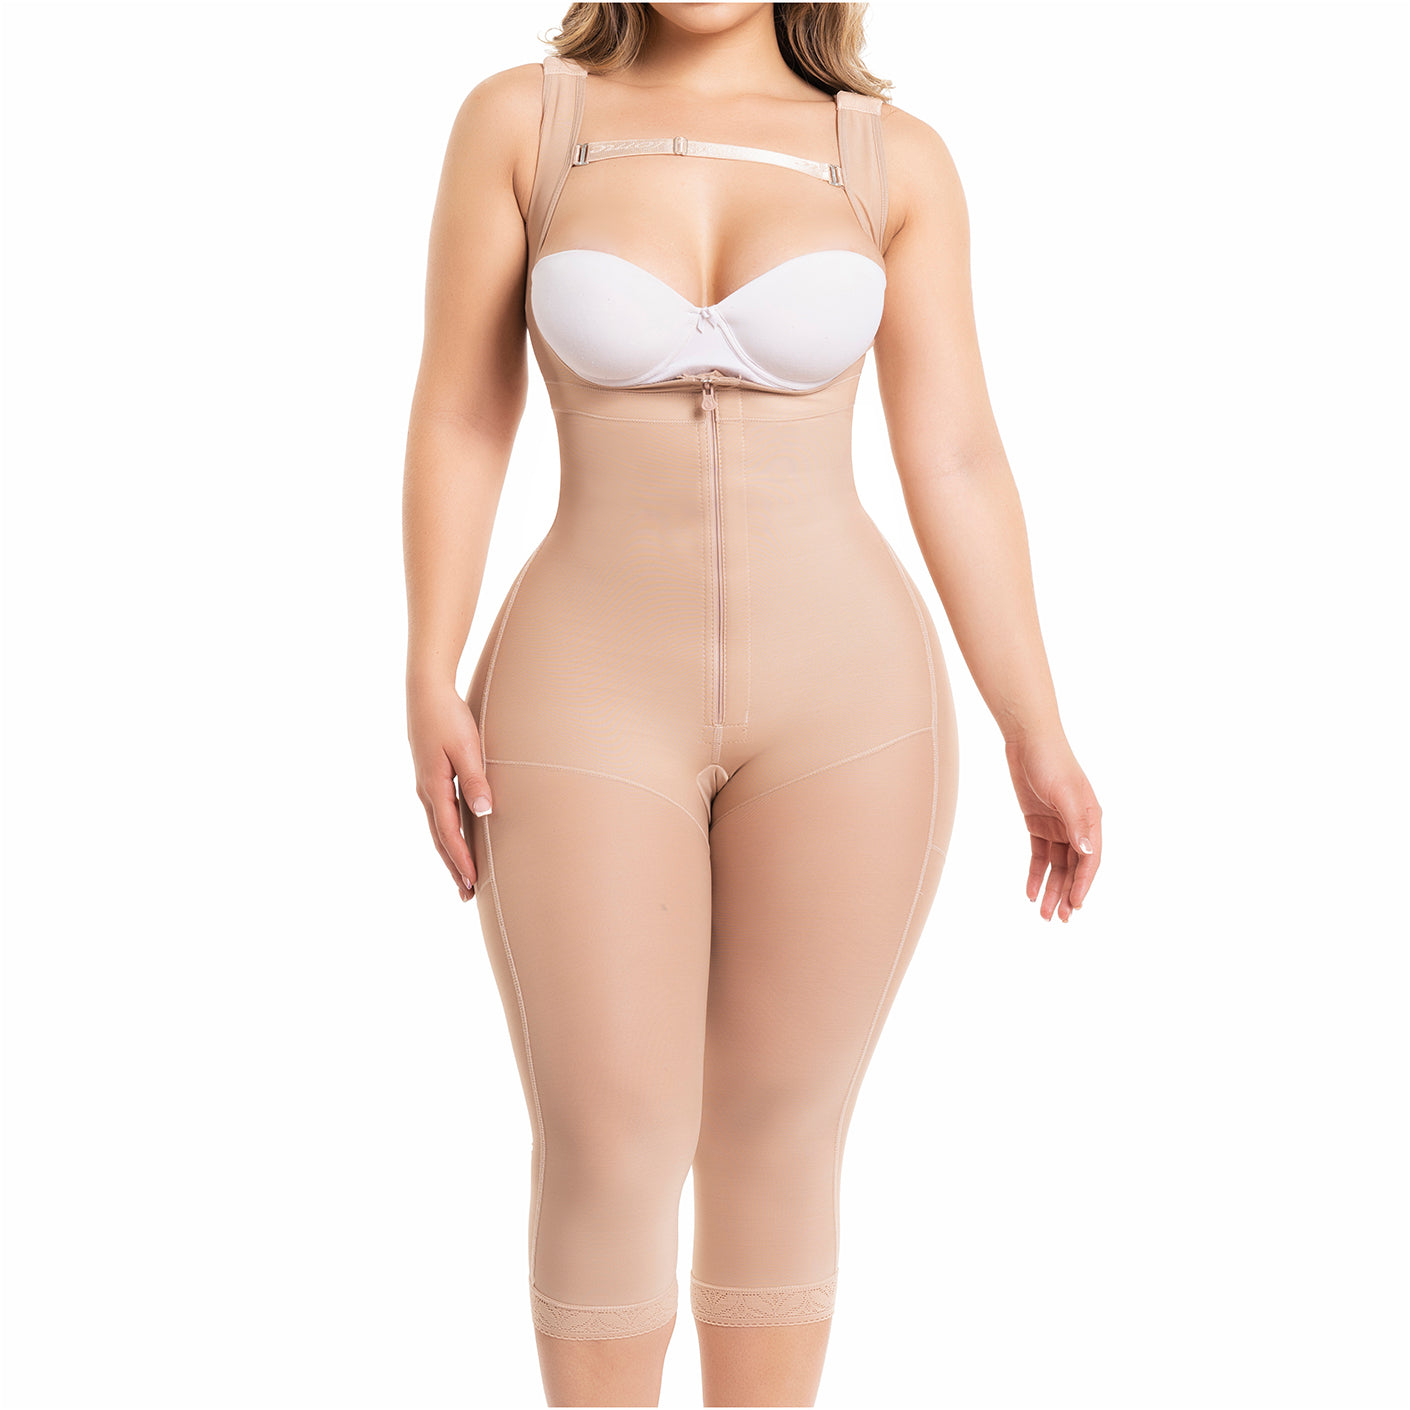 The Best Selling Colombian Girdles – Tagged salome – Page 2